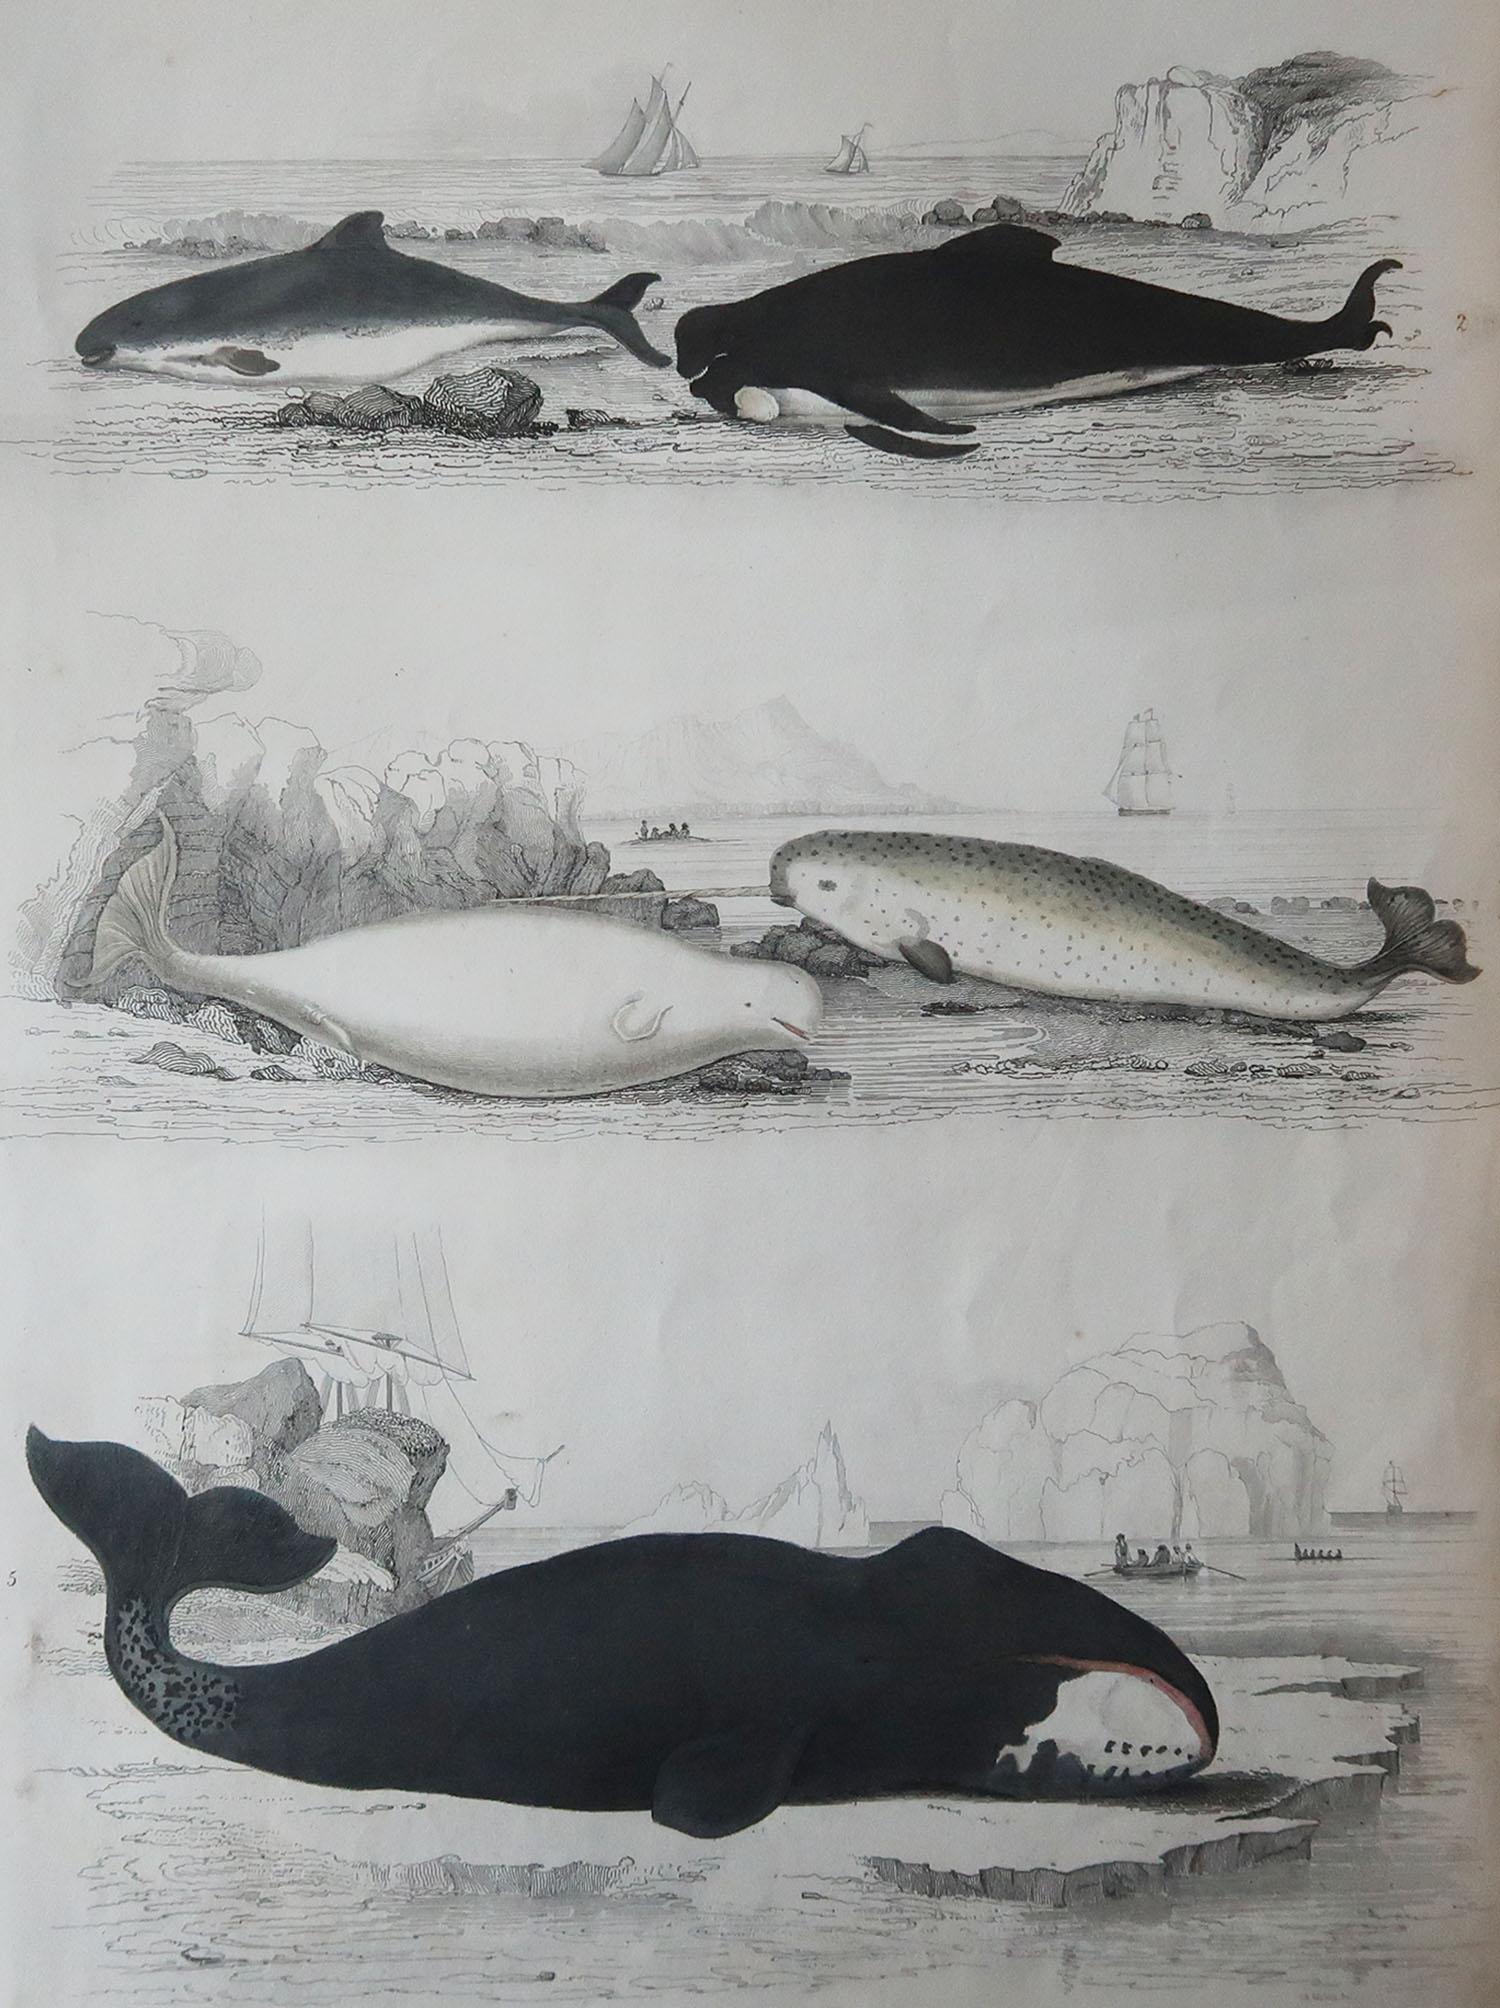 Great image of whales and dolphins

Unframed. It gives you the option of perhaps making a set up using your own choice of frames.

Lithograph after Cpt. Brown, Gilpin and Edwards with original hand color.

Published circa 1835

Free